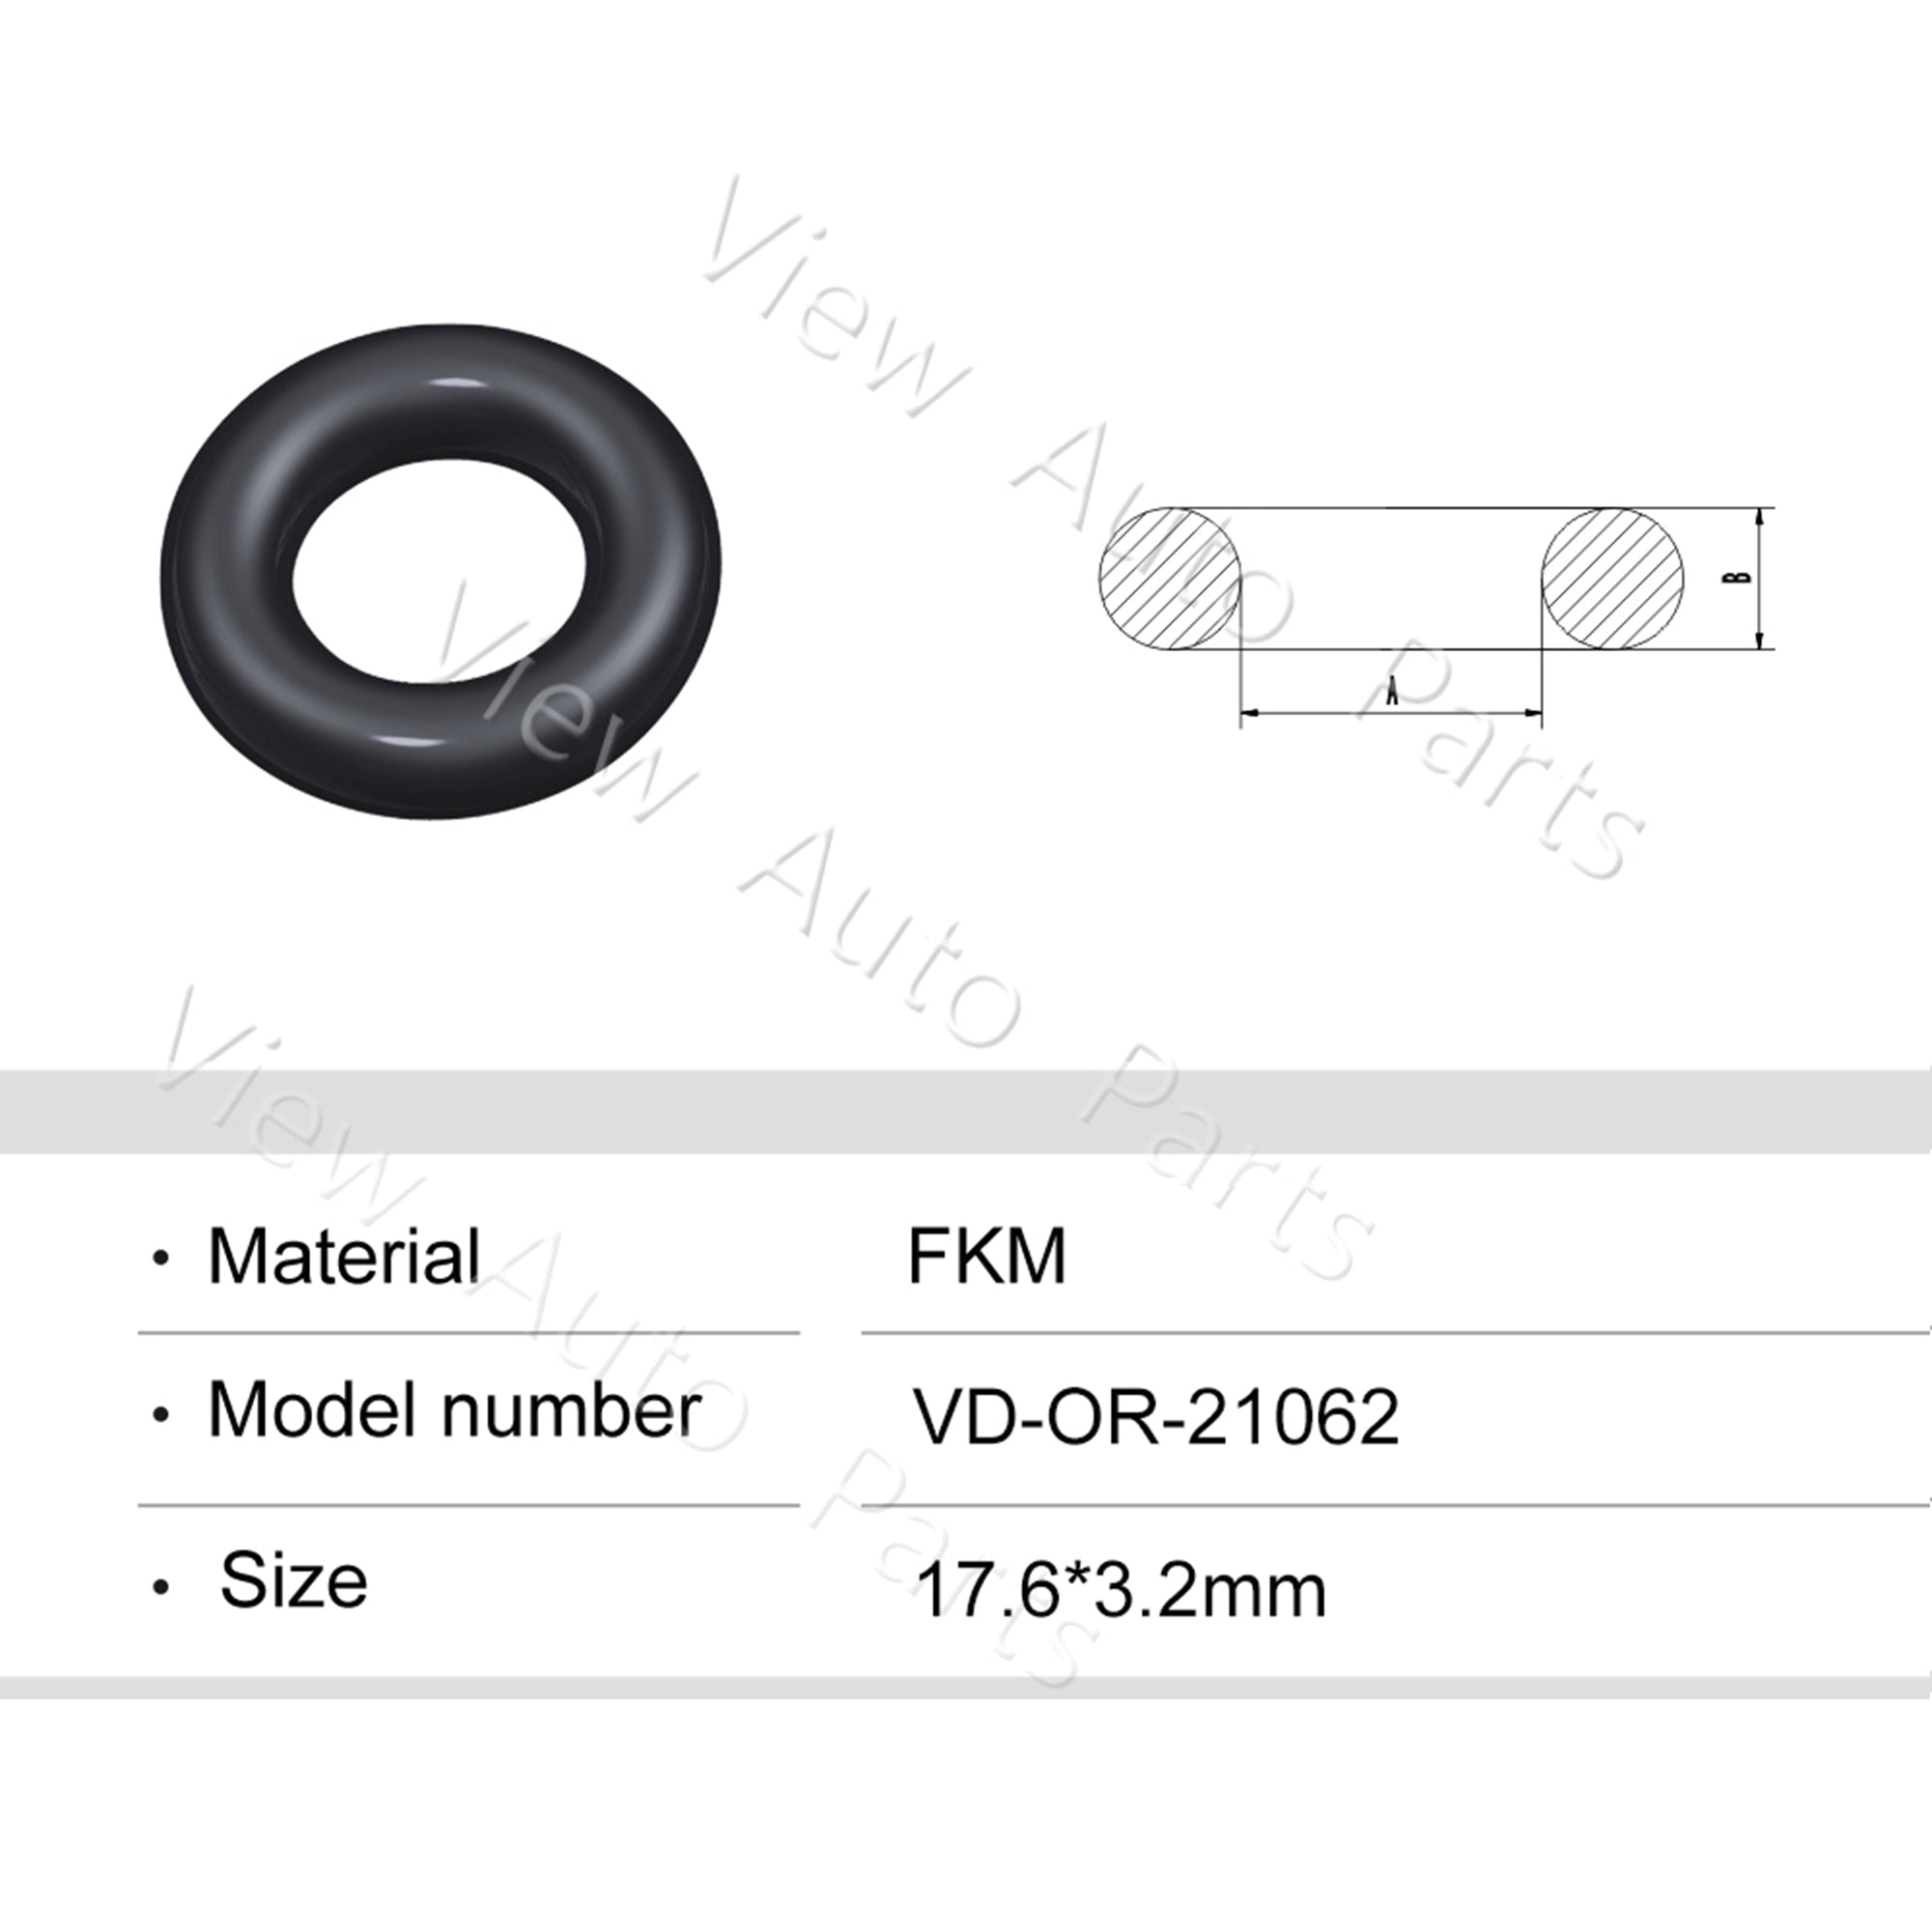 Fuel Injector Rubber Seal Orings for Mazda Car Fuel Injector Repair Kits FKM & Rubber Heat Resistant, Size: 17.6*3.2mm OR-21062